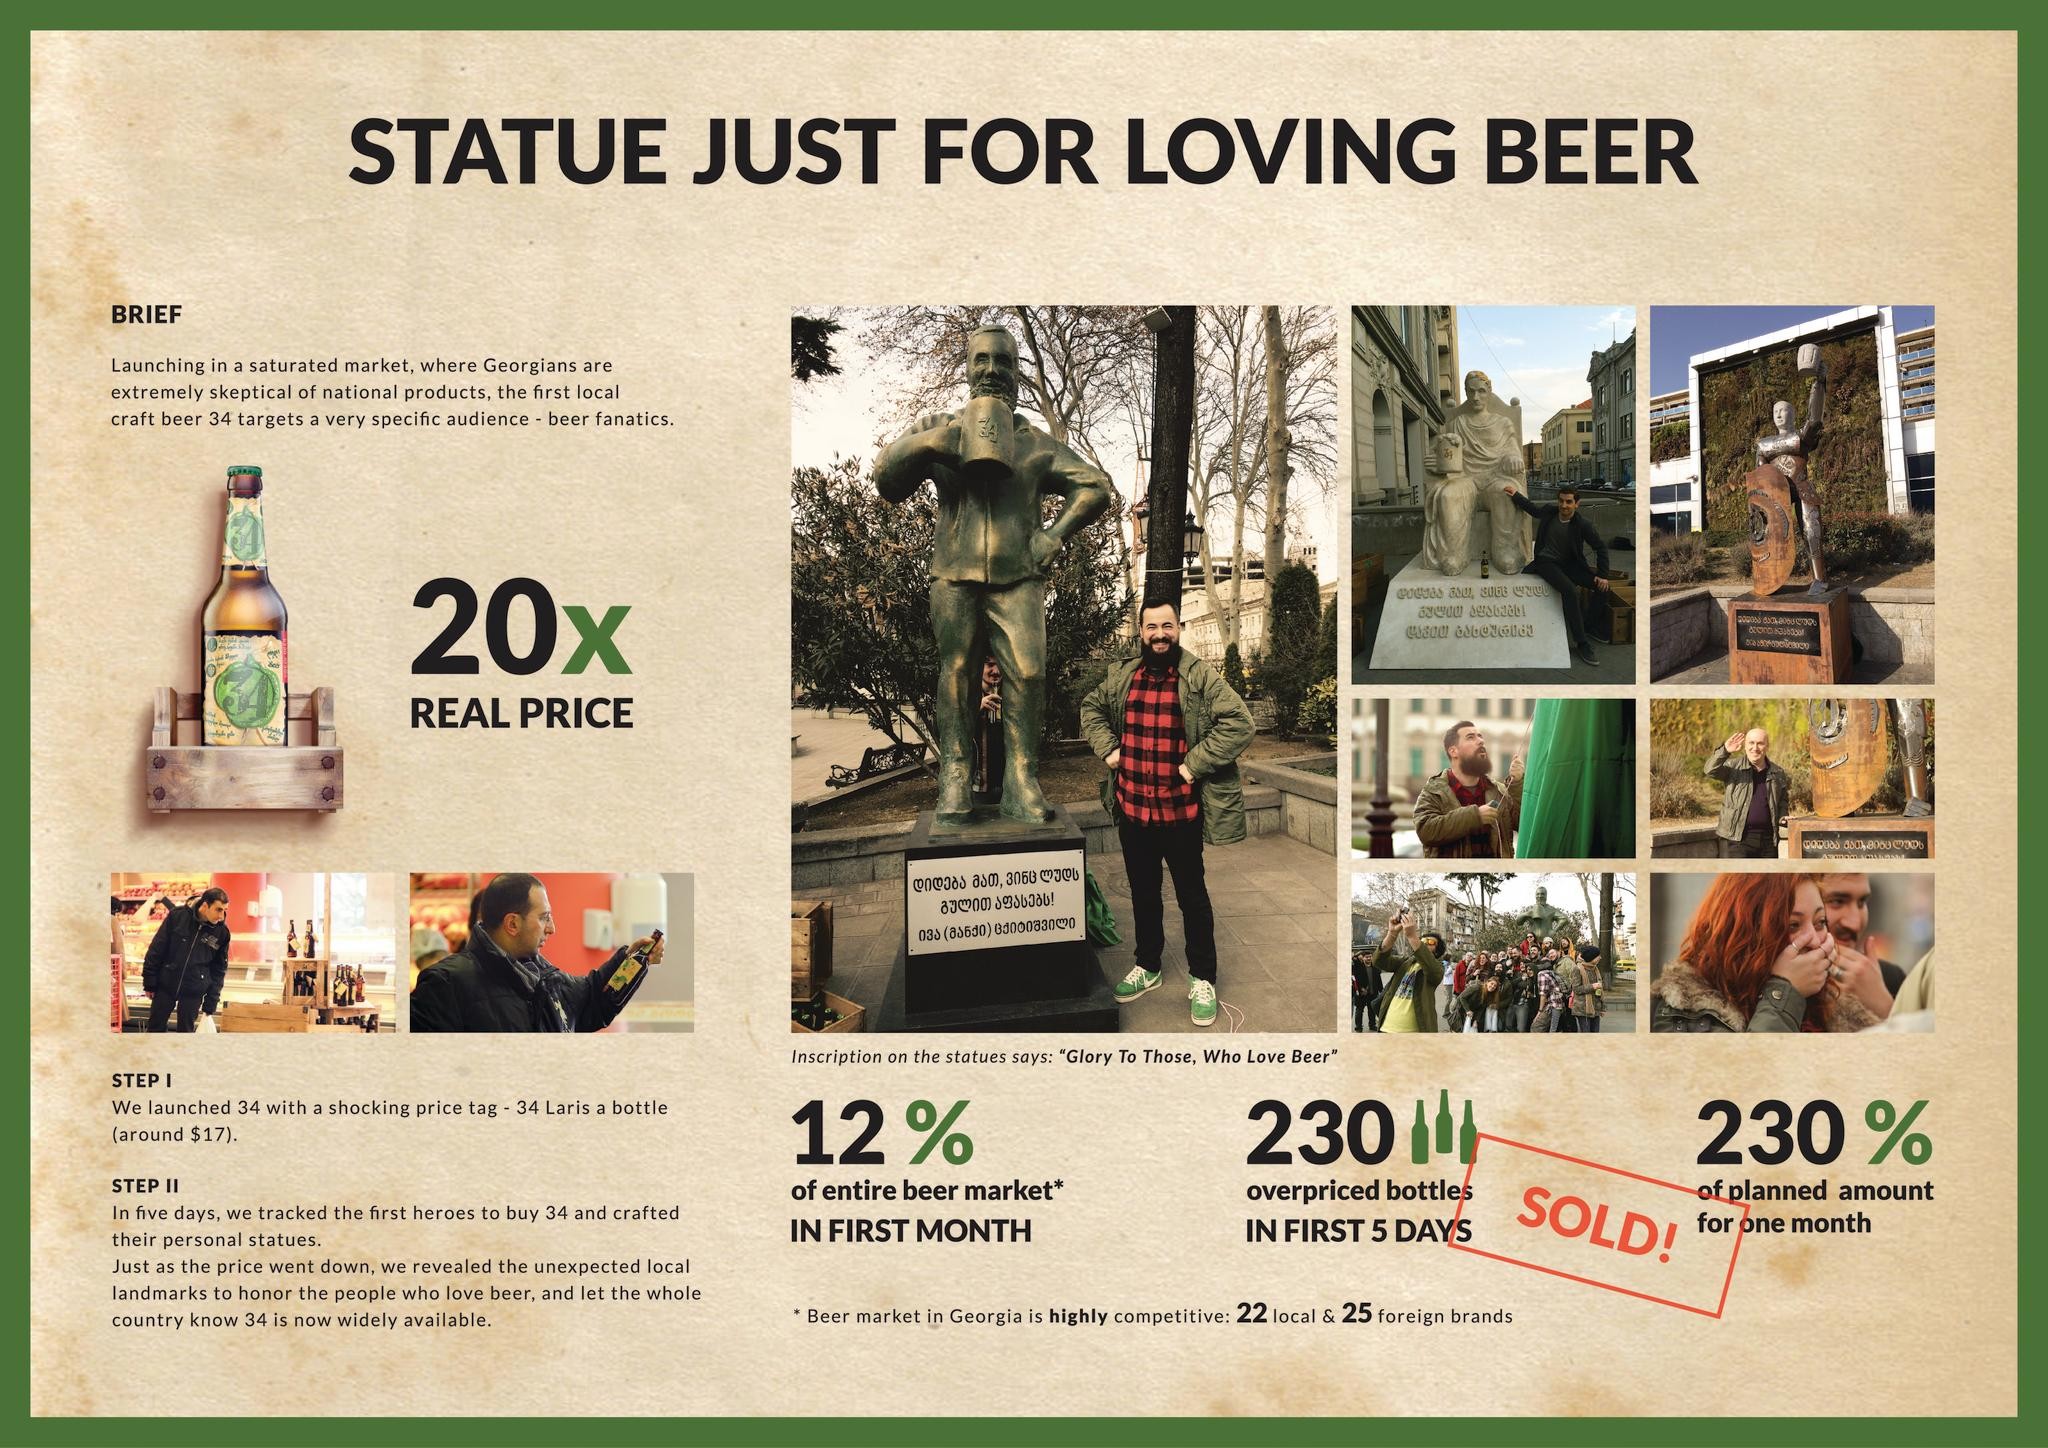 STATUE JUST FOR LOVING BEER